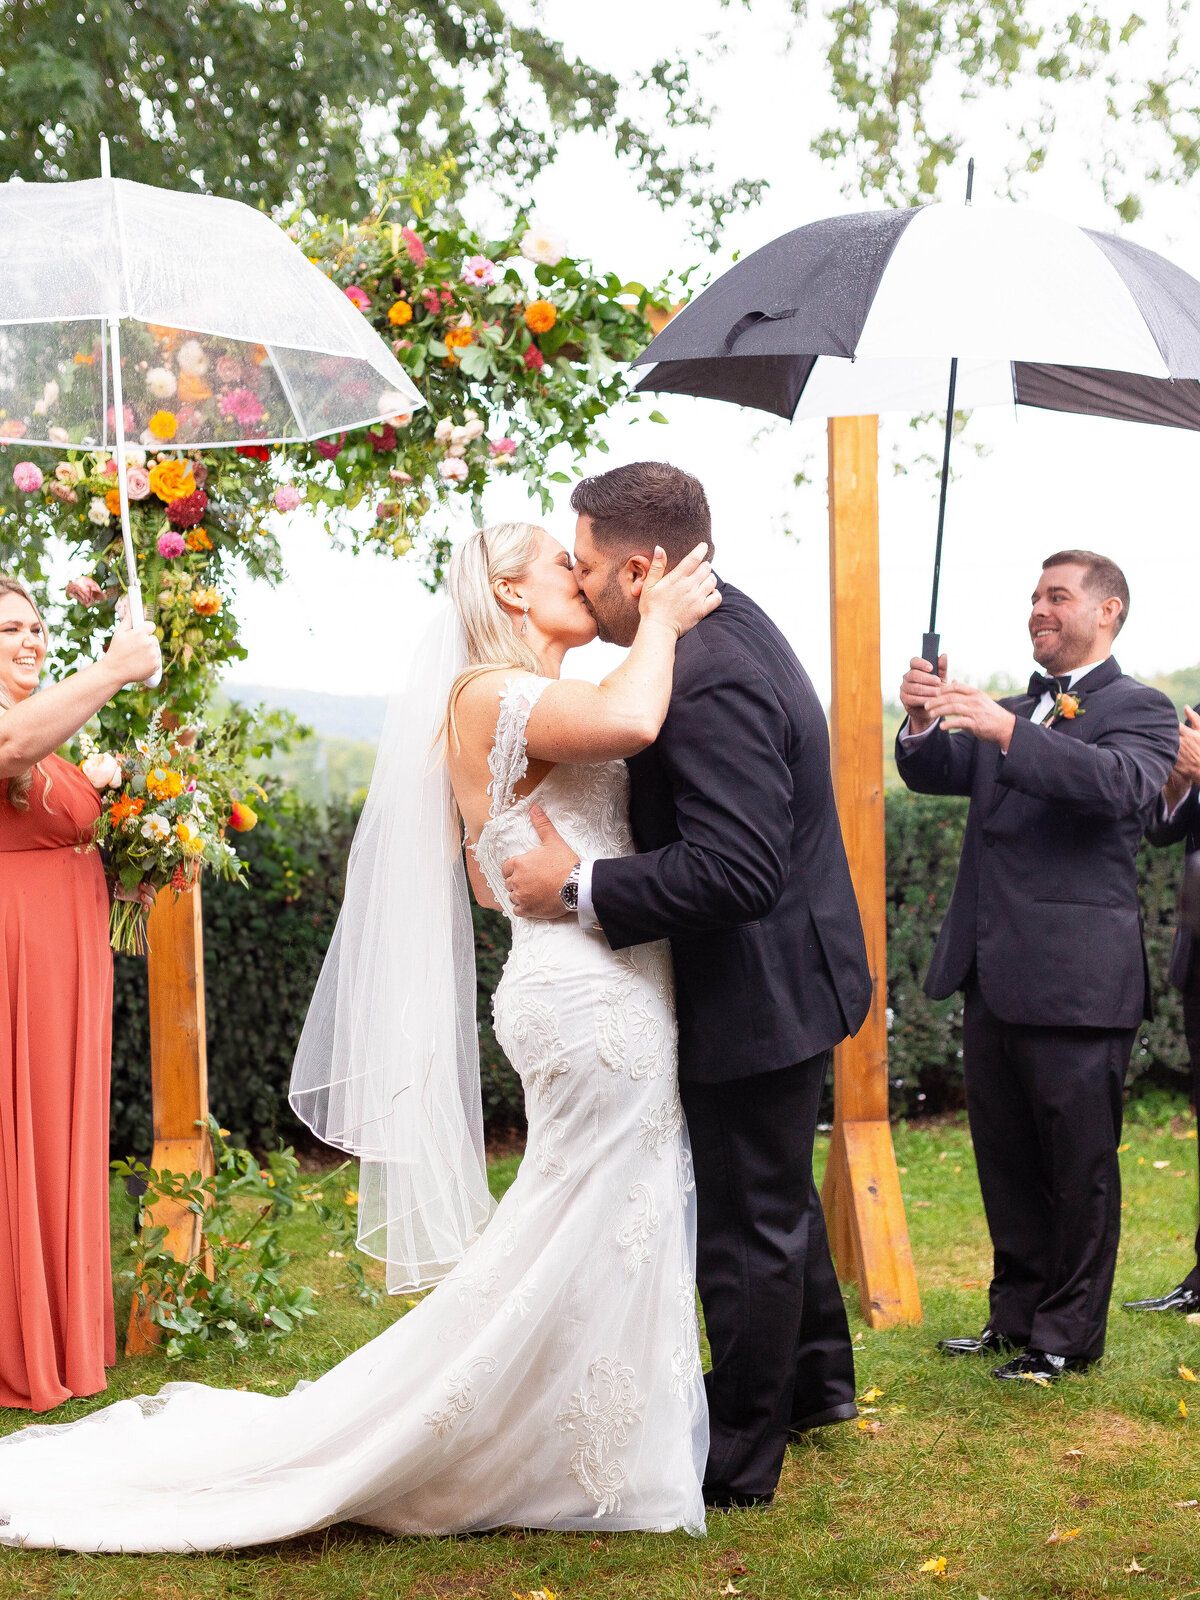 Bride and groom share a first kiss during their rainy ceremony.